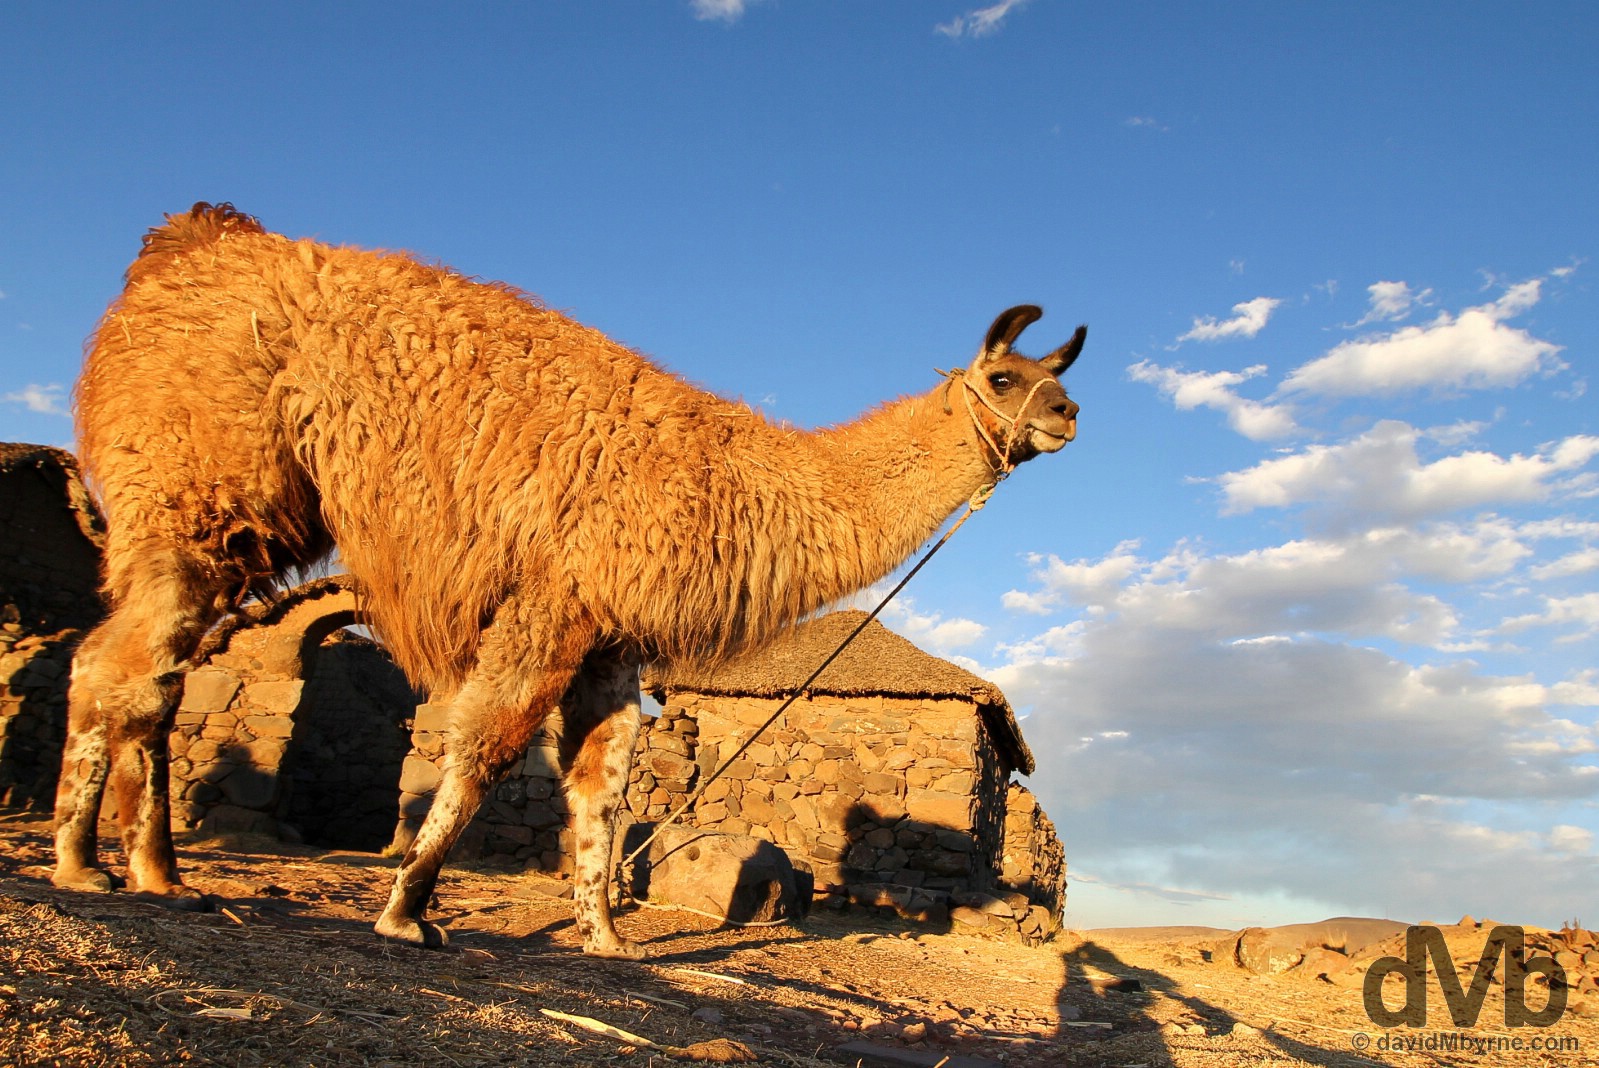 A llama on the shores of Lake Titicaca, Peru. August 19, 2015. 